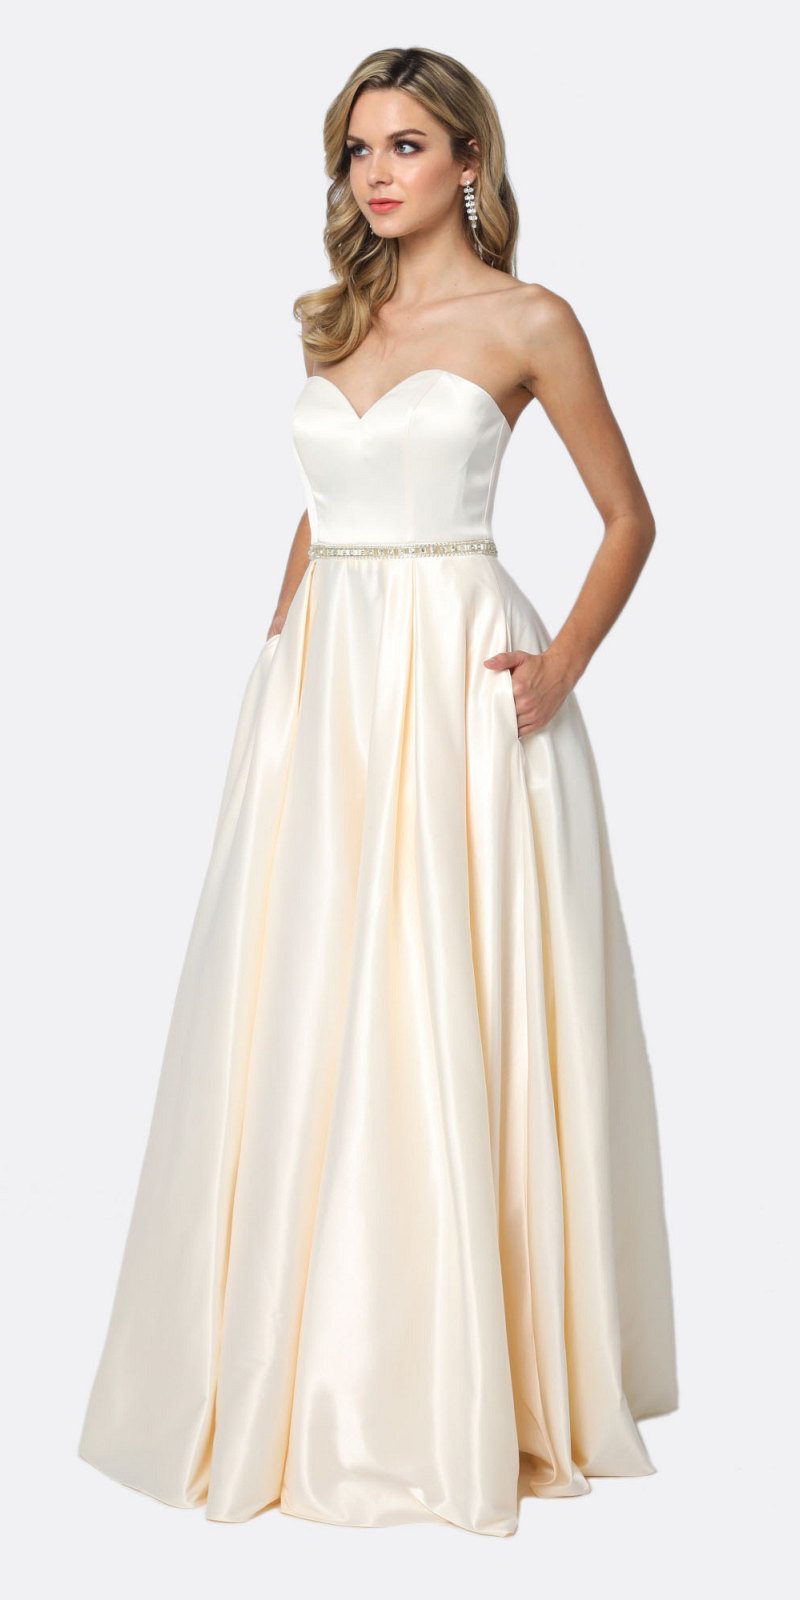 Juliet 687 Shiny Satin A Line Gown Champagne With Beaded Belt And Pockets